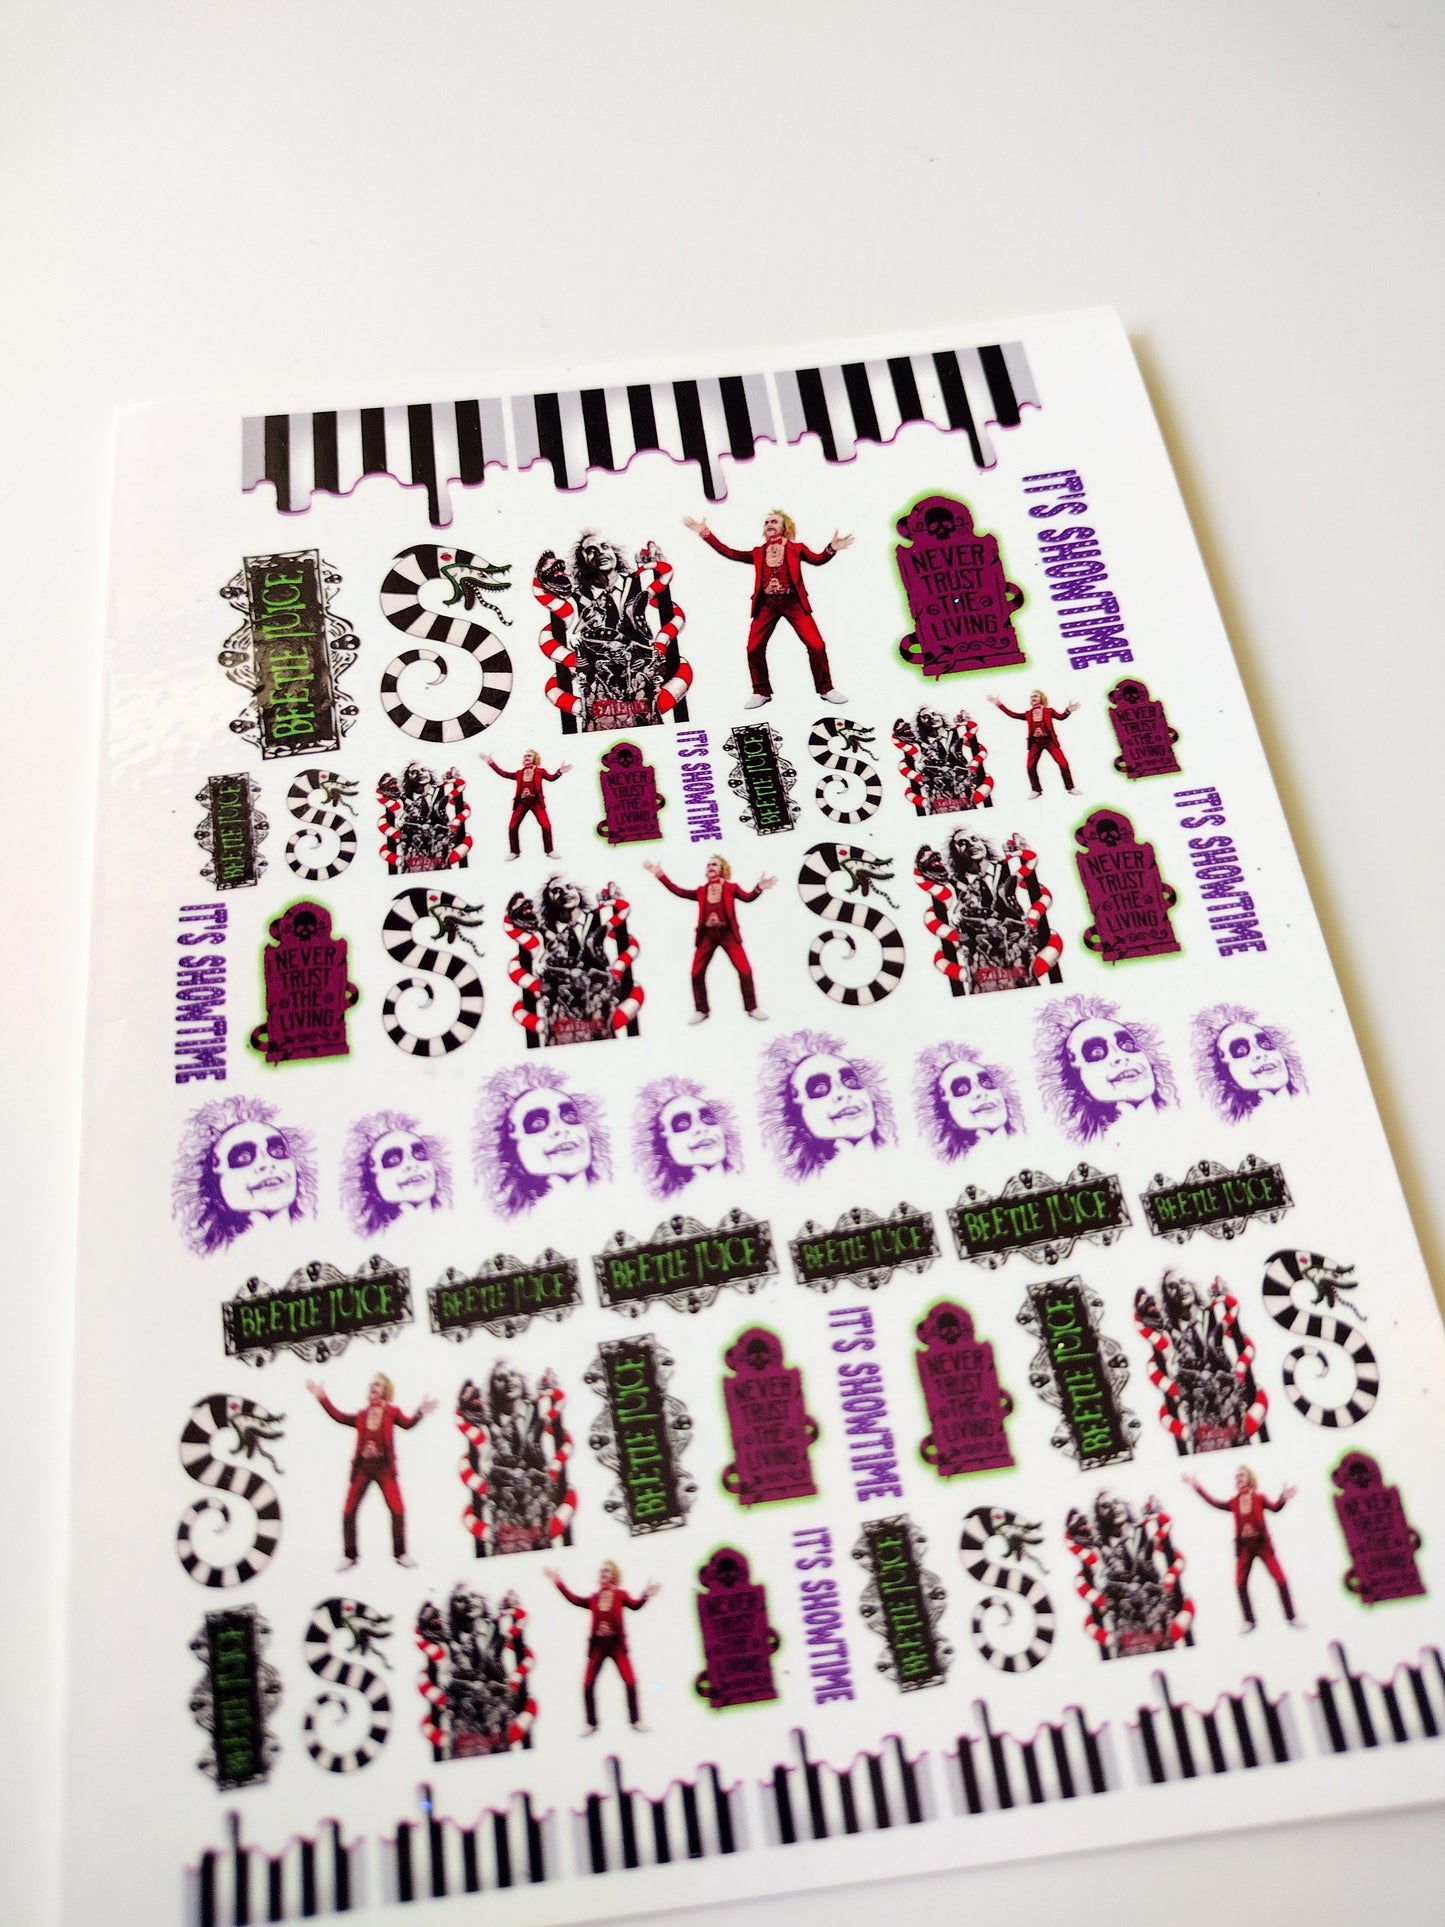 It's Show Time!- Beetle Juice Nail Art Decals